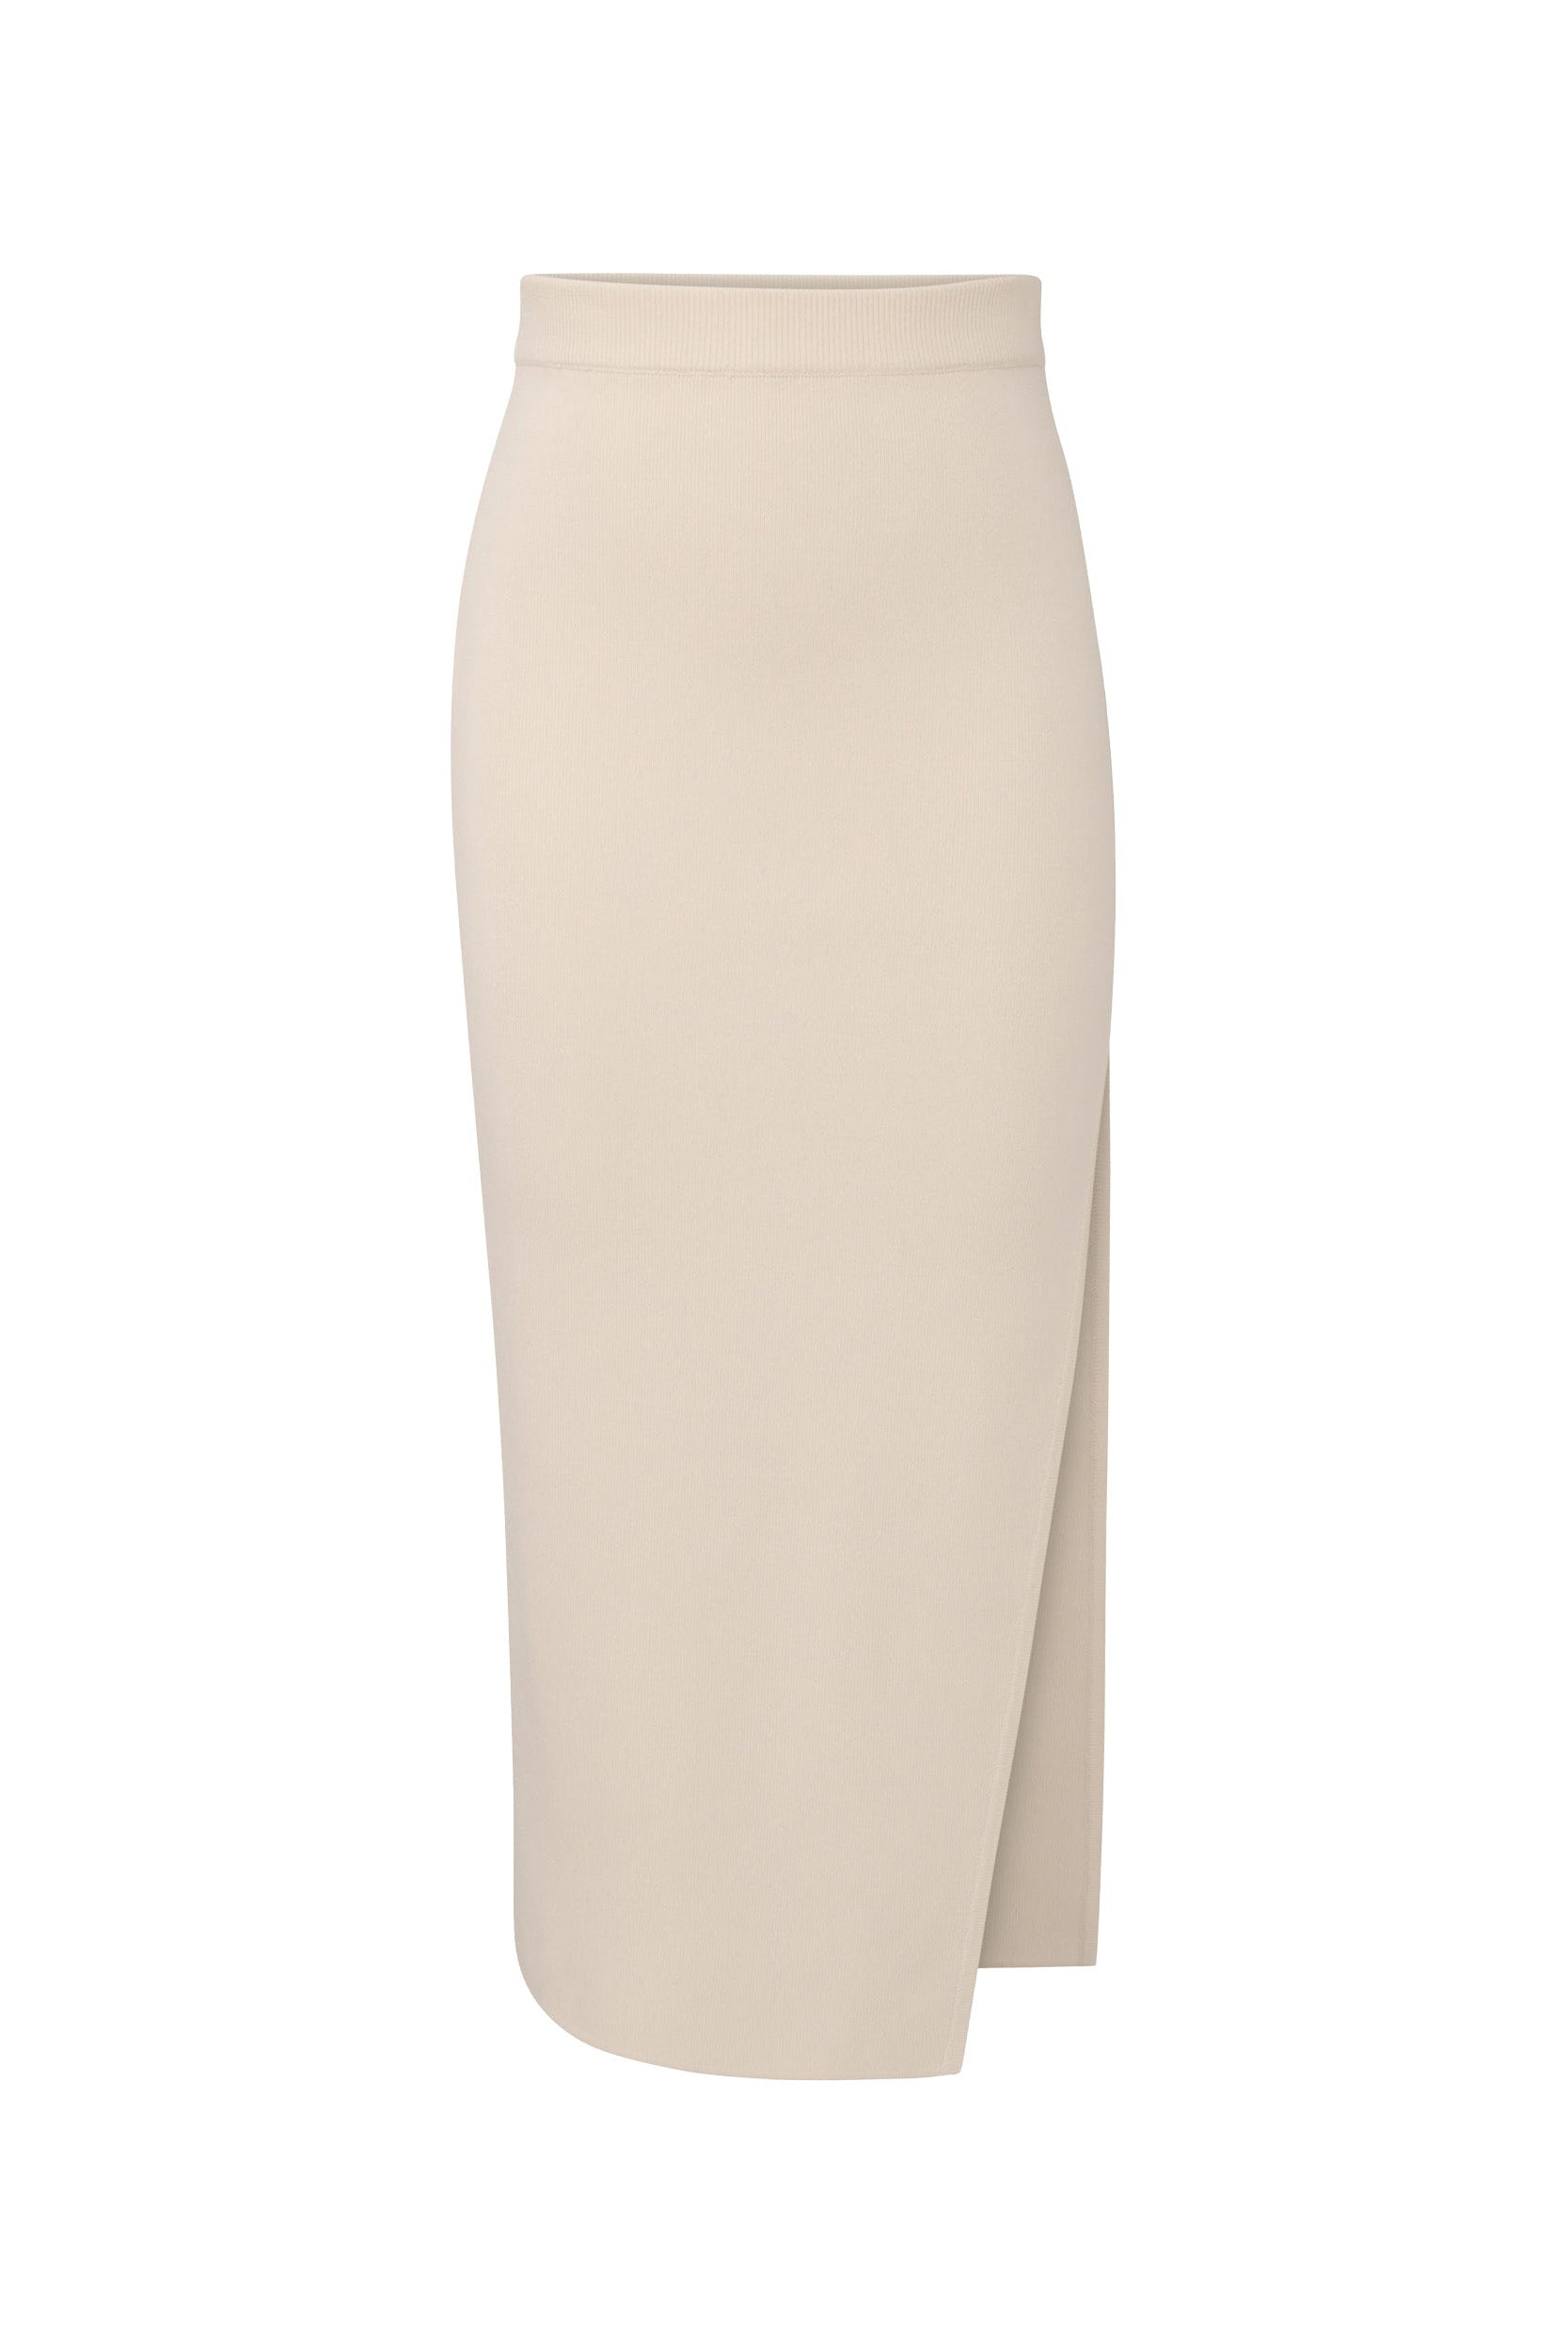 The Hamptons Midi Skirt in Pearl is a high-waisted, slim-fitted beige midi skirt featuring a front slit. Made from textured knit, it showcases a clean and minimalist design without any visible embellishments, making it ideal for both casual and formal occasions.